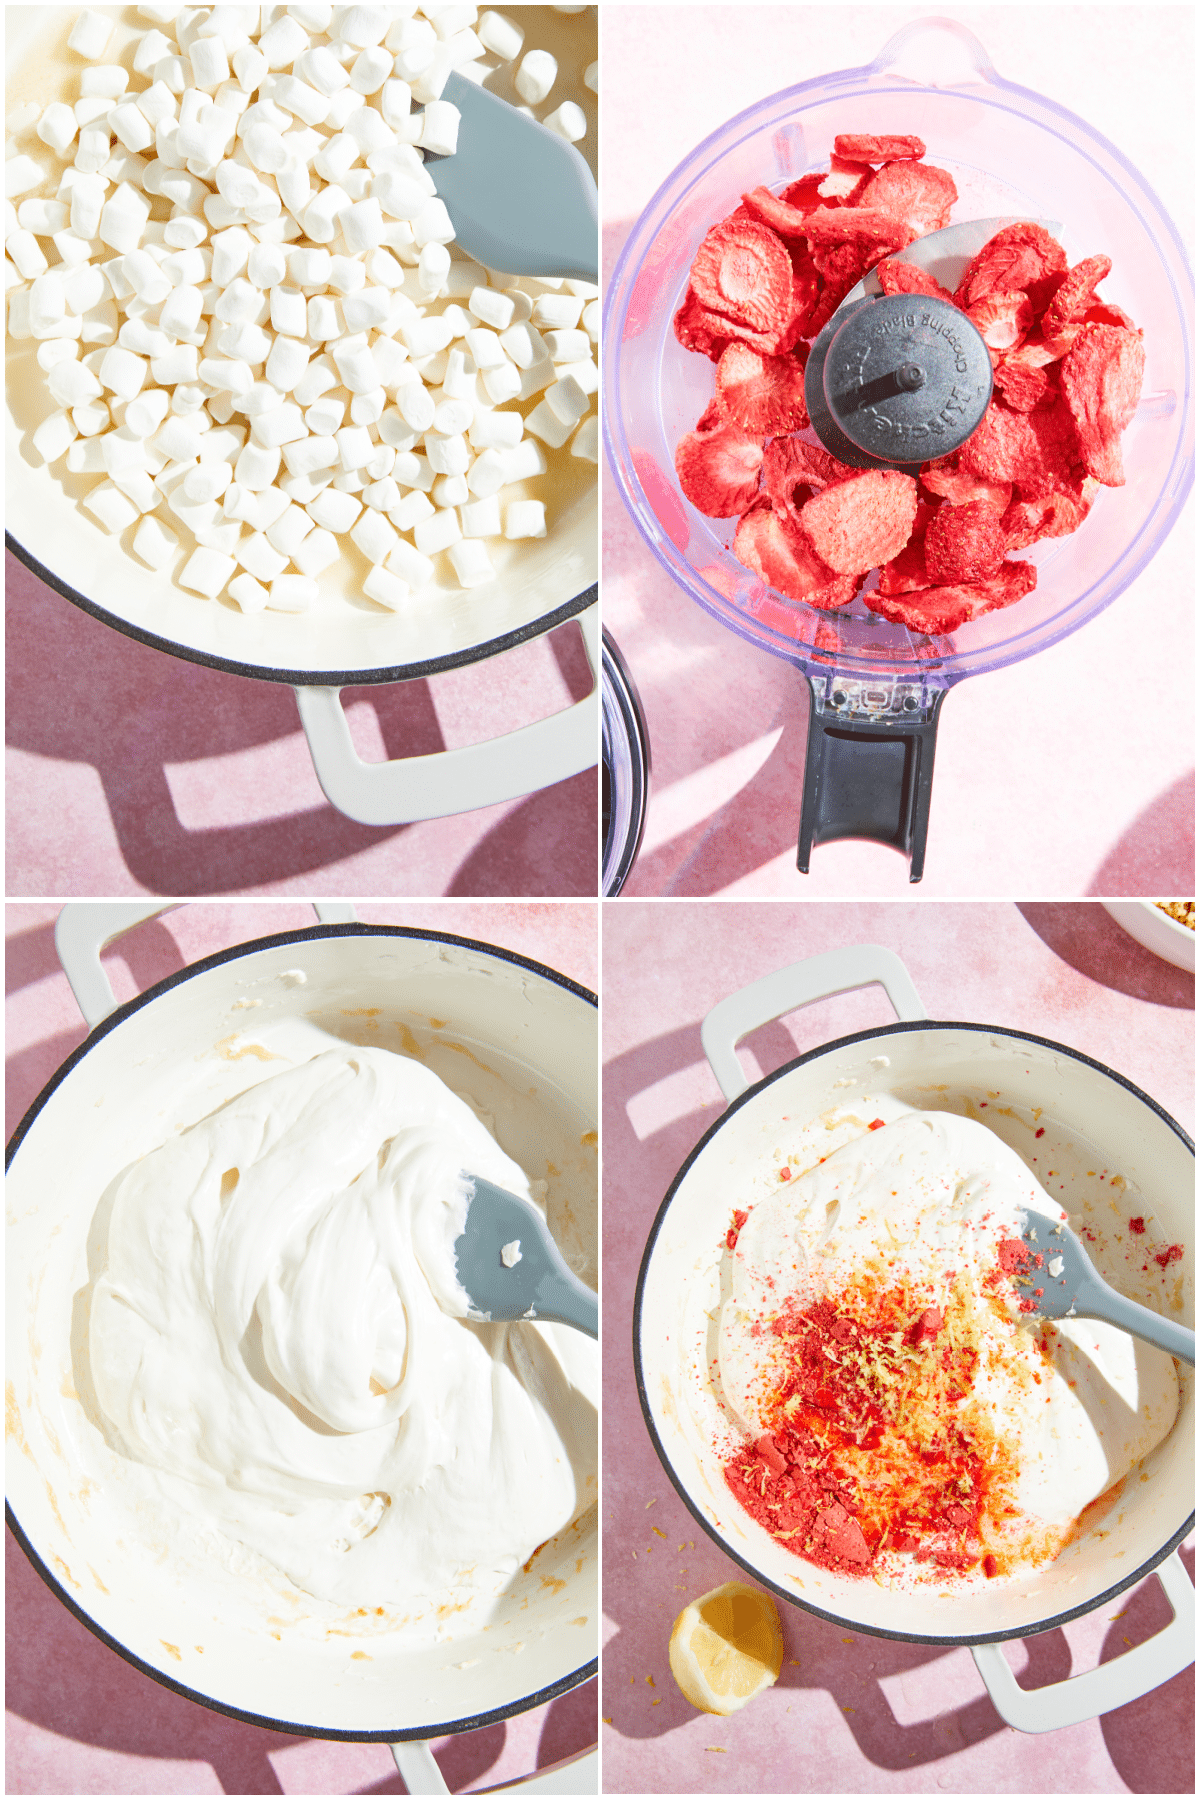 A four image collage showing how to make strawberry lemon rice crispies, part one: Melt marshmallows and butter in a pot, process freeze dried strawberries into powder, add this strawberry powder, lemon juice and zest to the melted marshmallows.